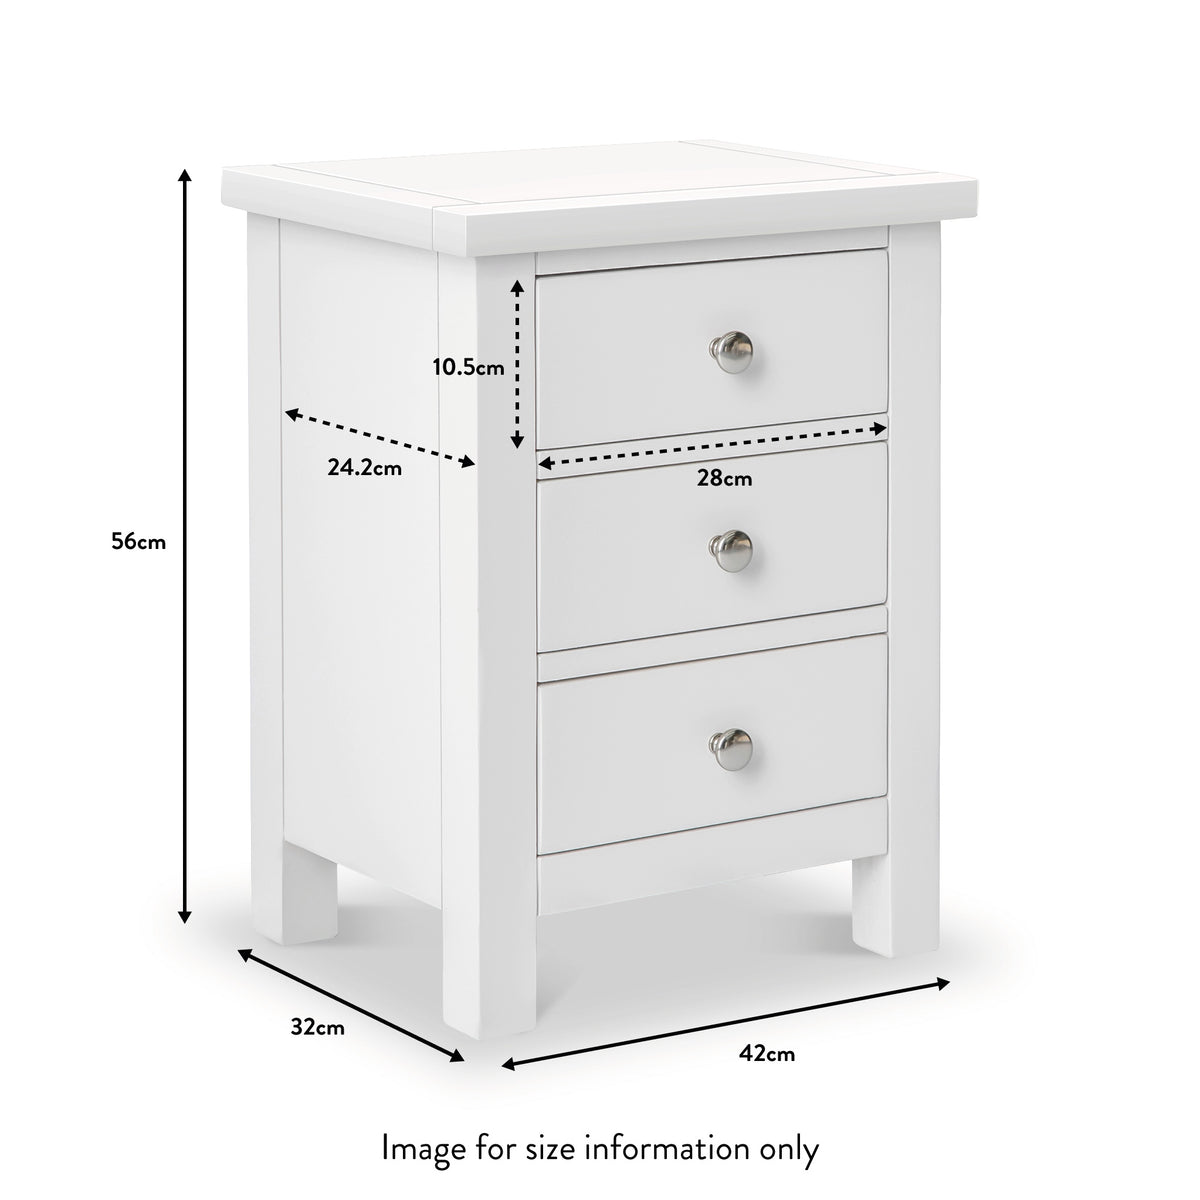 Cornish Bedside Table dimensions